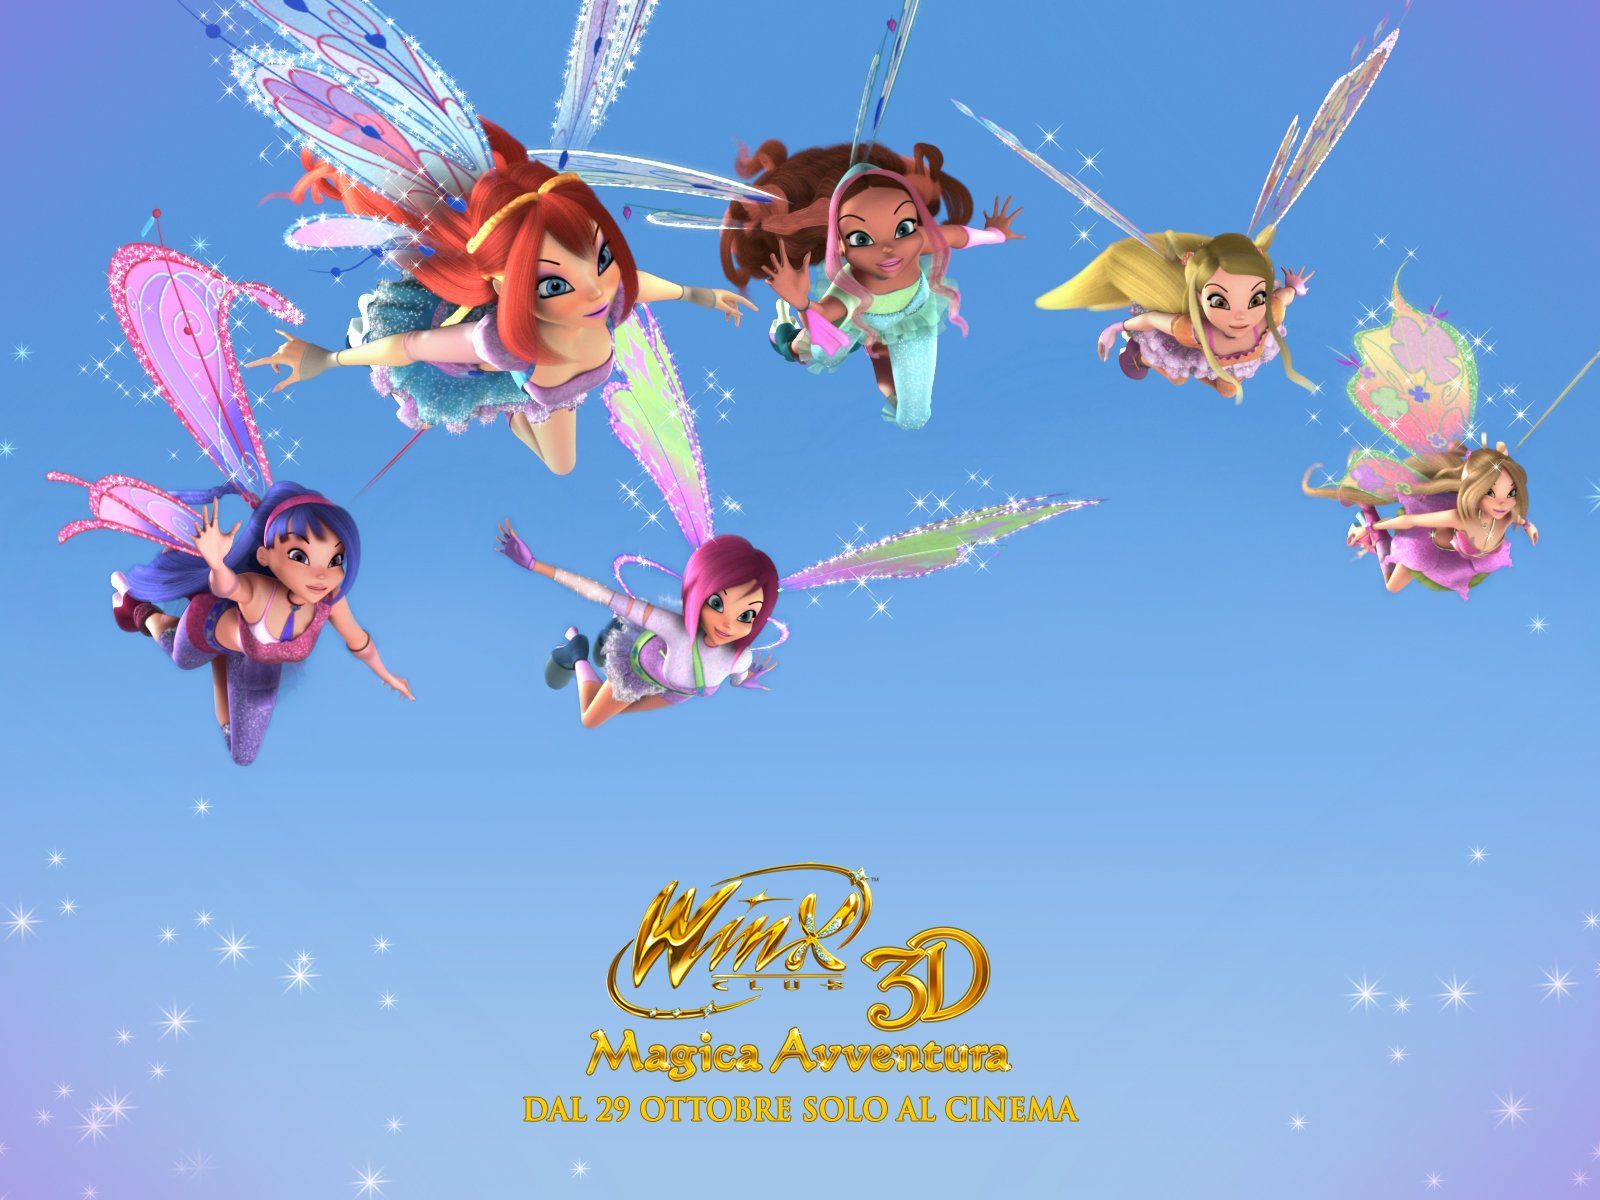 Winx Club free Wallpapers 40 photos for your desktop, download